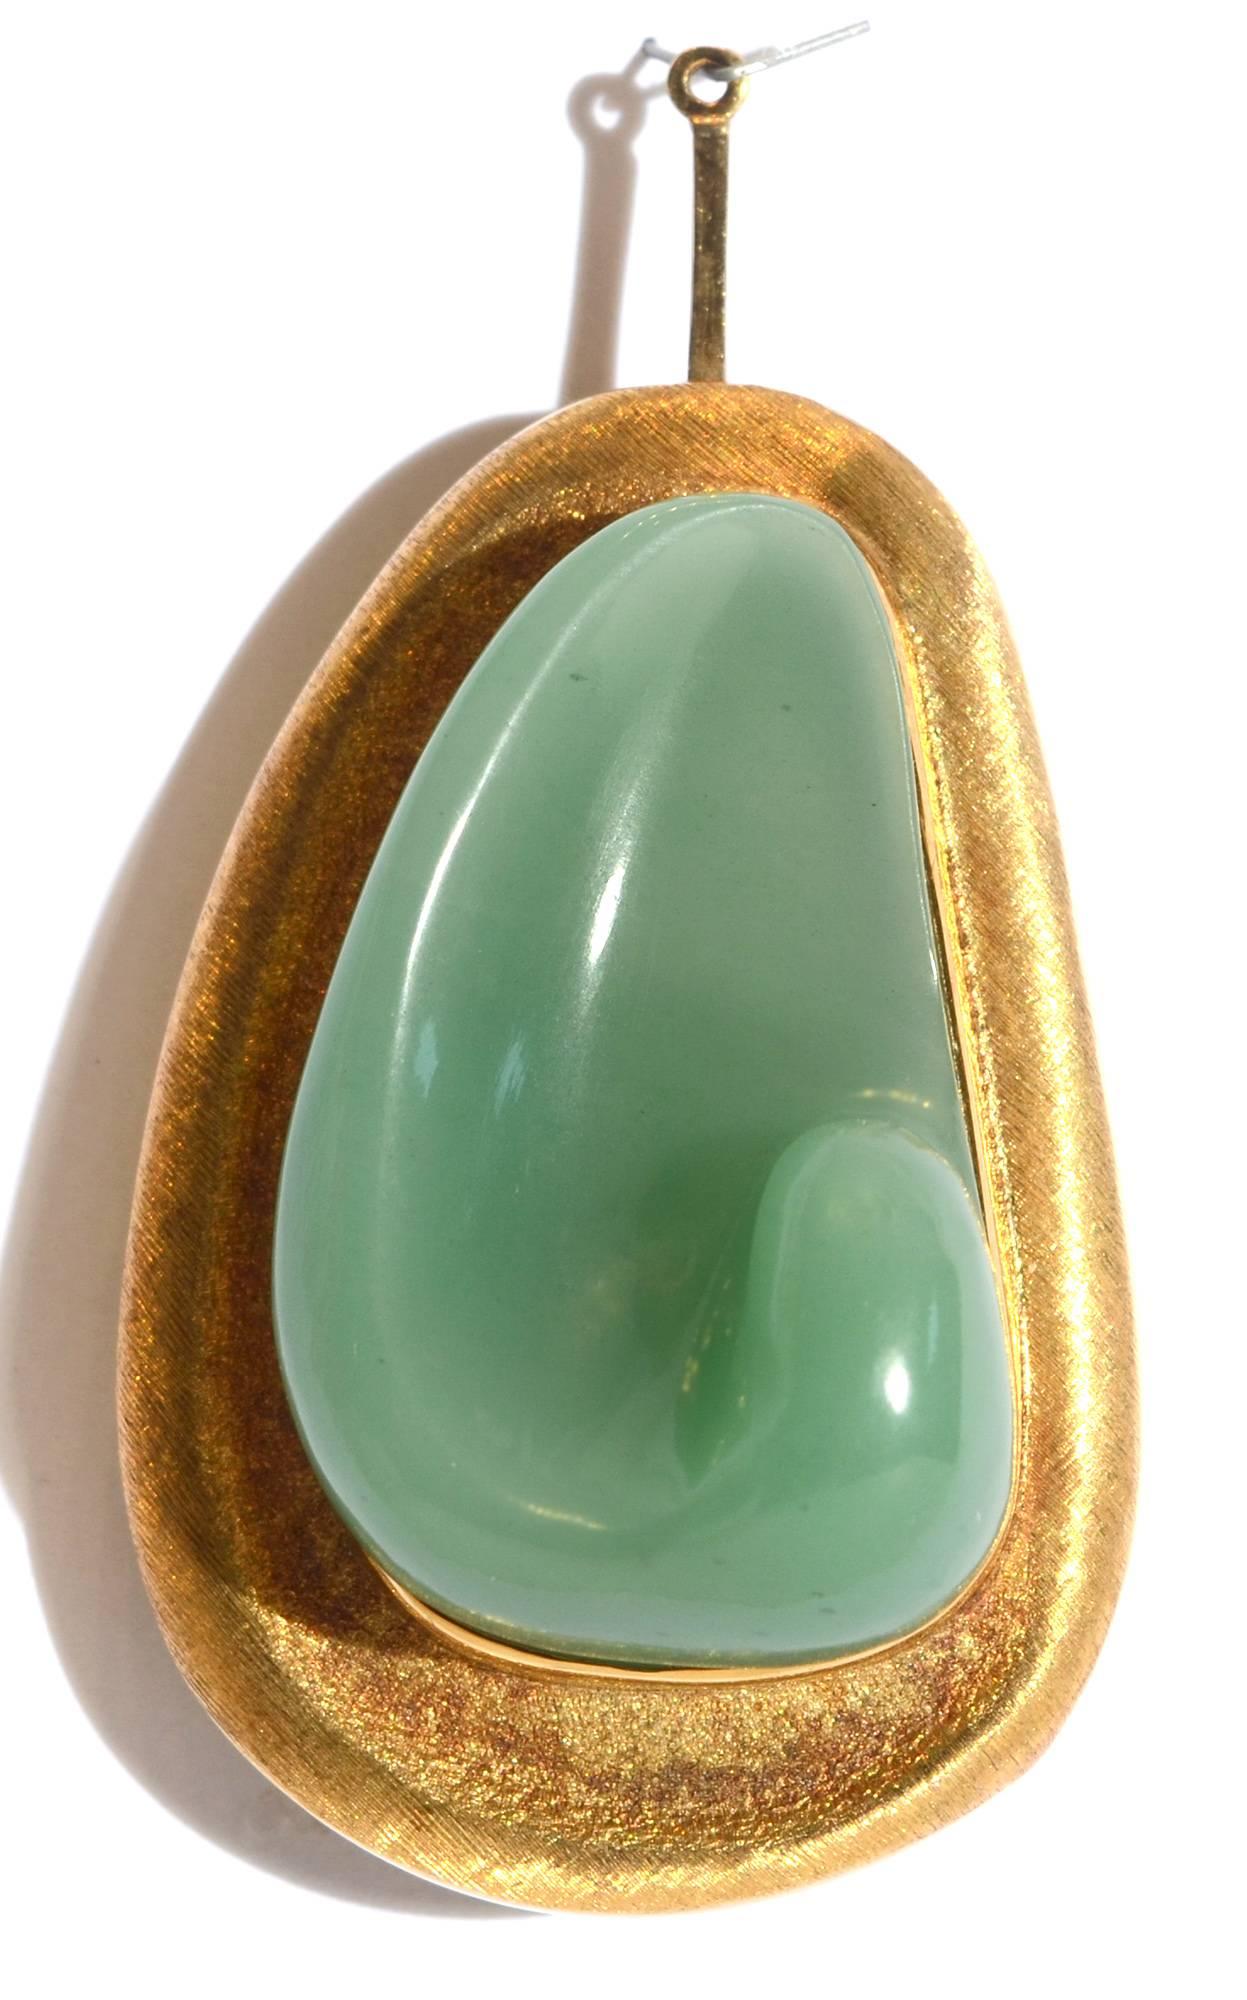 This chrysoprase forma livre piece by Burle Marx is both a brooch and a pendant. It has a cleverly designed retractable stem to allow it to be worn on a chain. The 18 karat gold frame around the carved stone has the lightly brushed finish often used